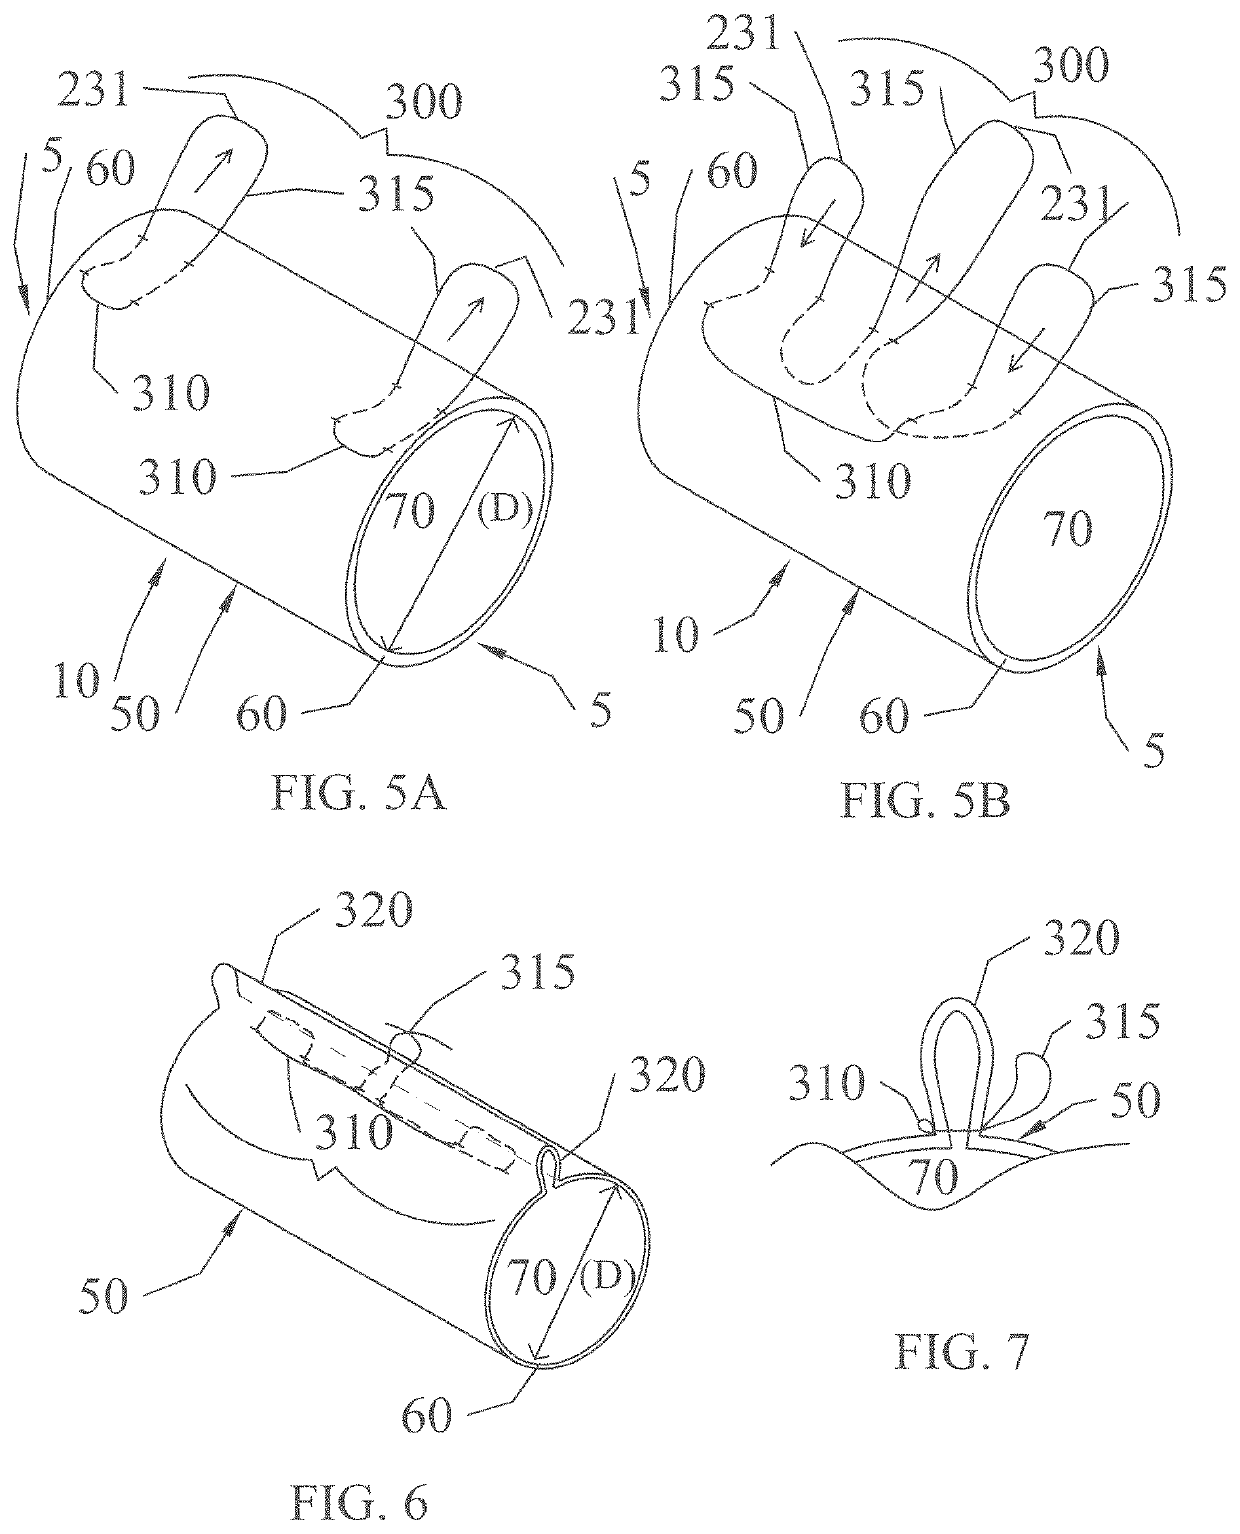 Implant devices with a pre-set pulley system